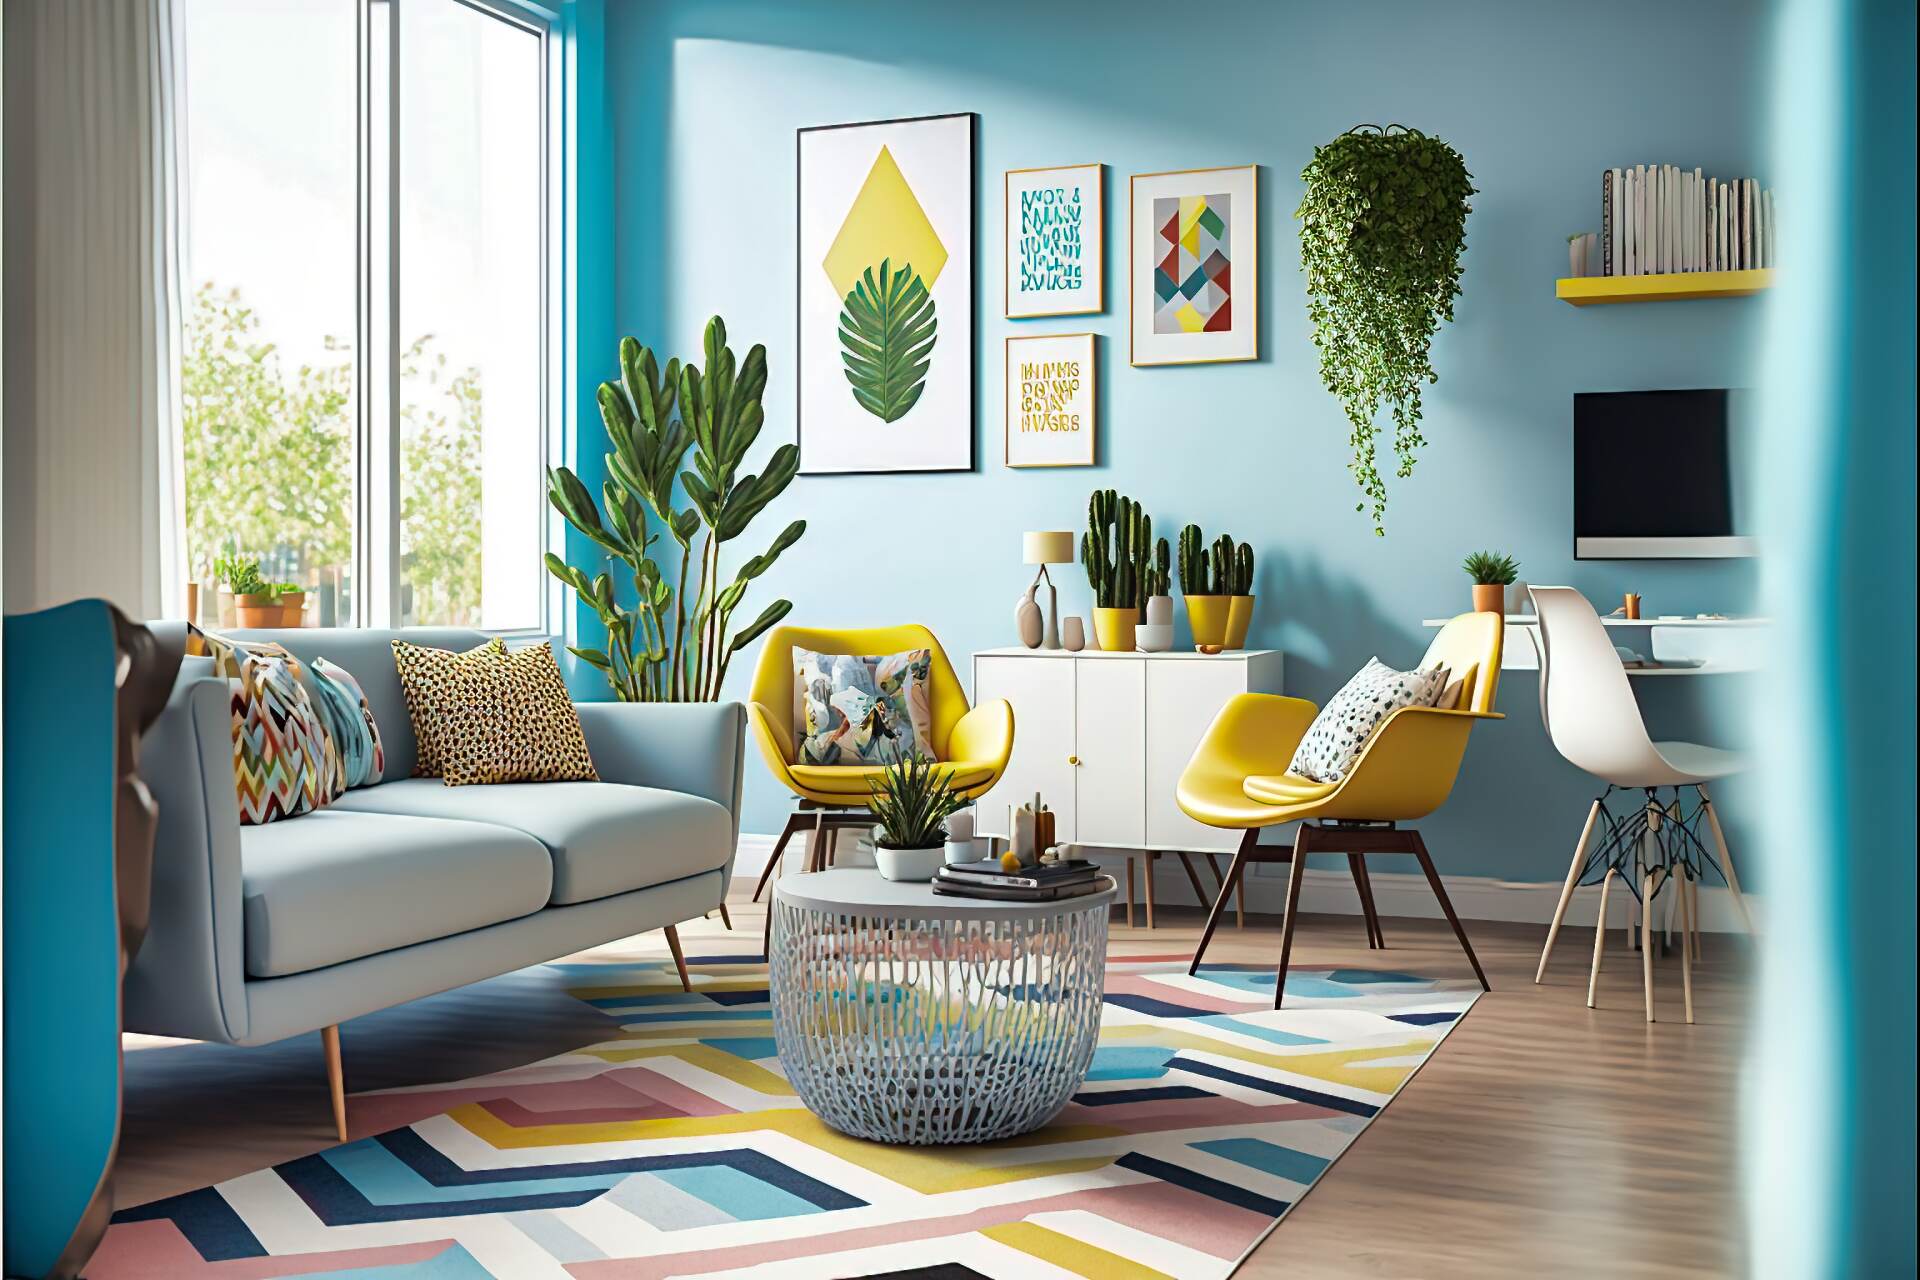 This Cheerful Modern Living Room Features Light Blue Walls, A Yellow Armchair, And A White Sofa. A Colorful Rug With Geometric Shapes And A Large Potted Plant Bring Life To The Corner, While A Sleek Coffee Table And A Pair Of Matching Side Tables Complete The Modern Look.